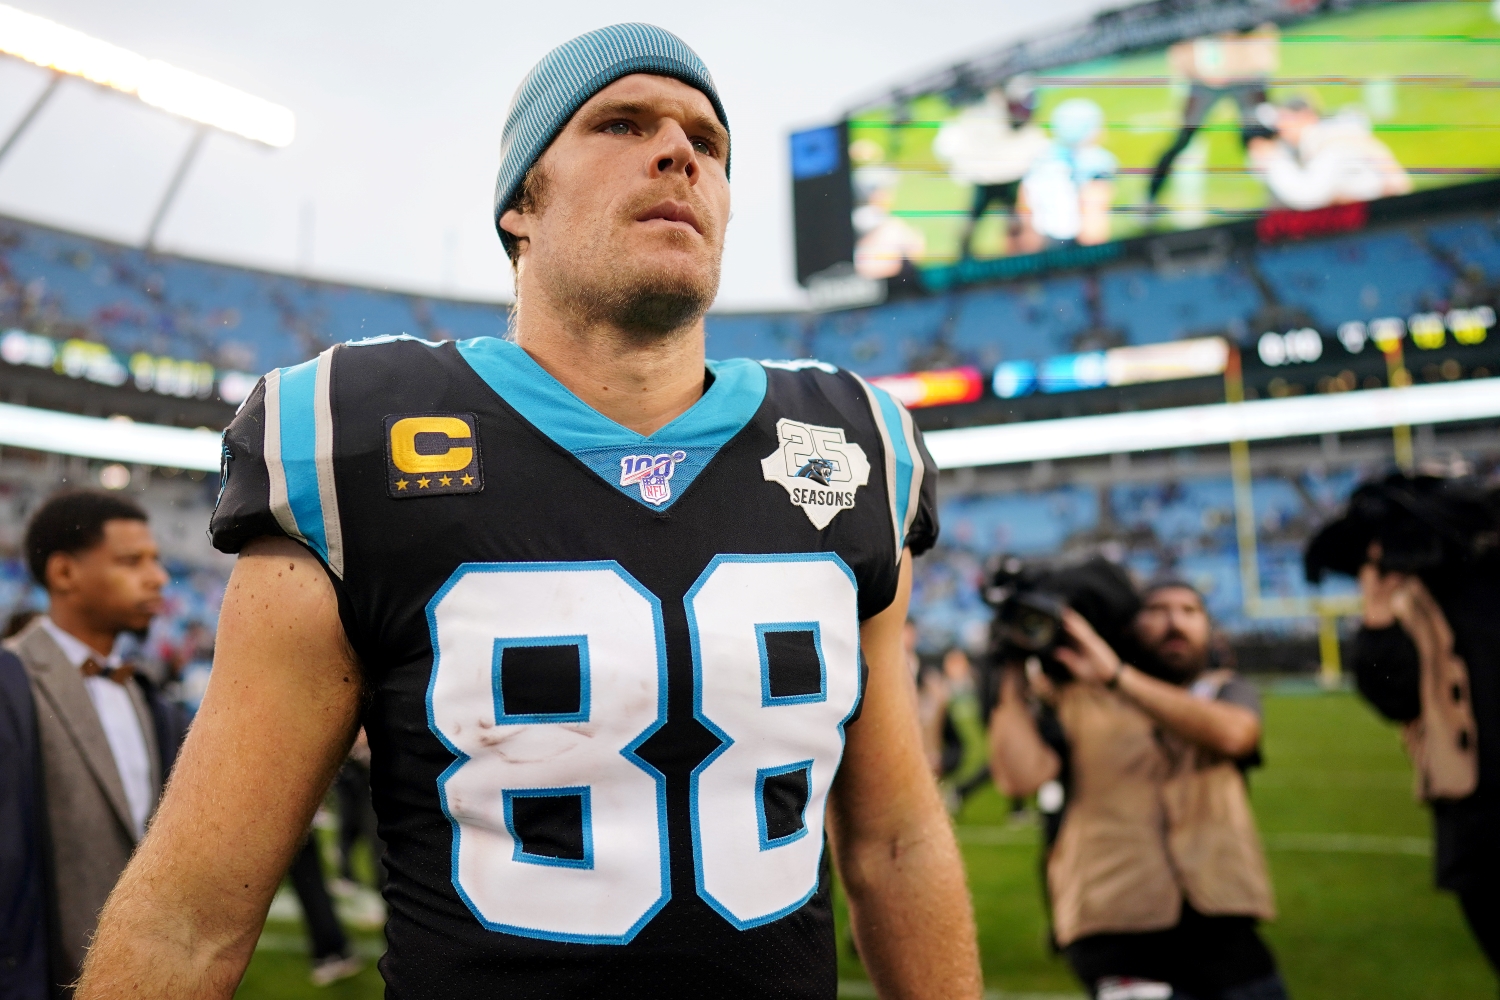 Carolina Panthers tight end Greg Olsen exits the field after a game.